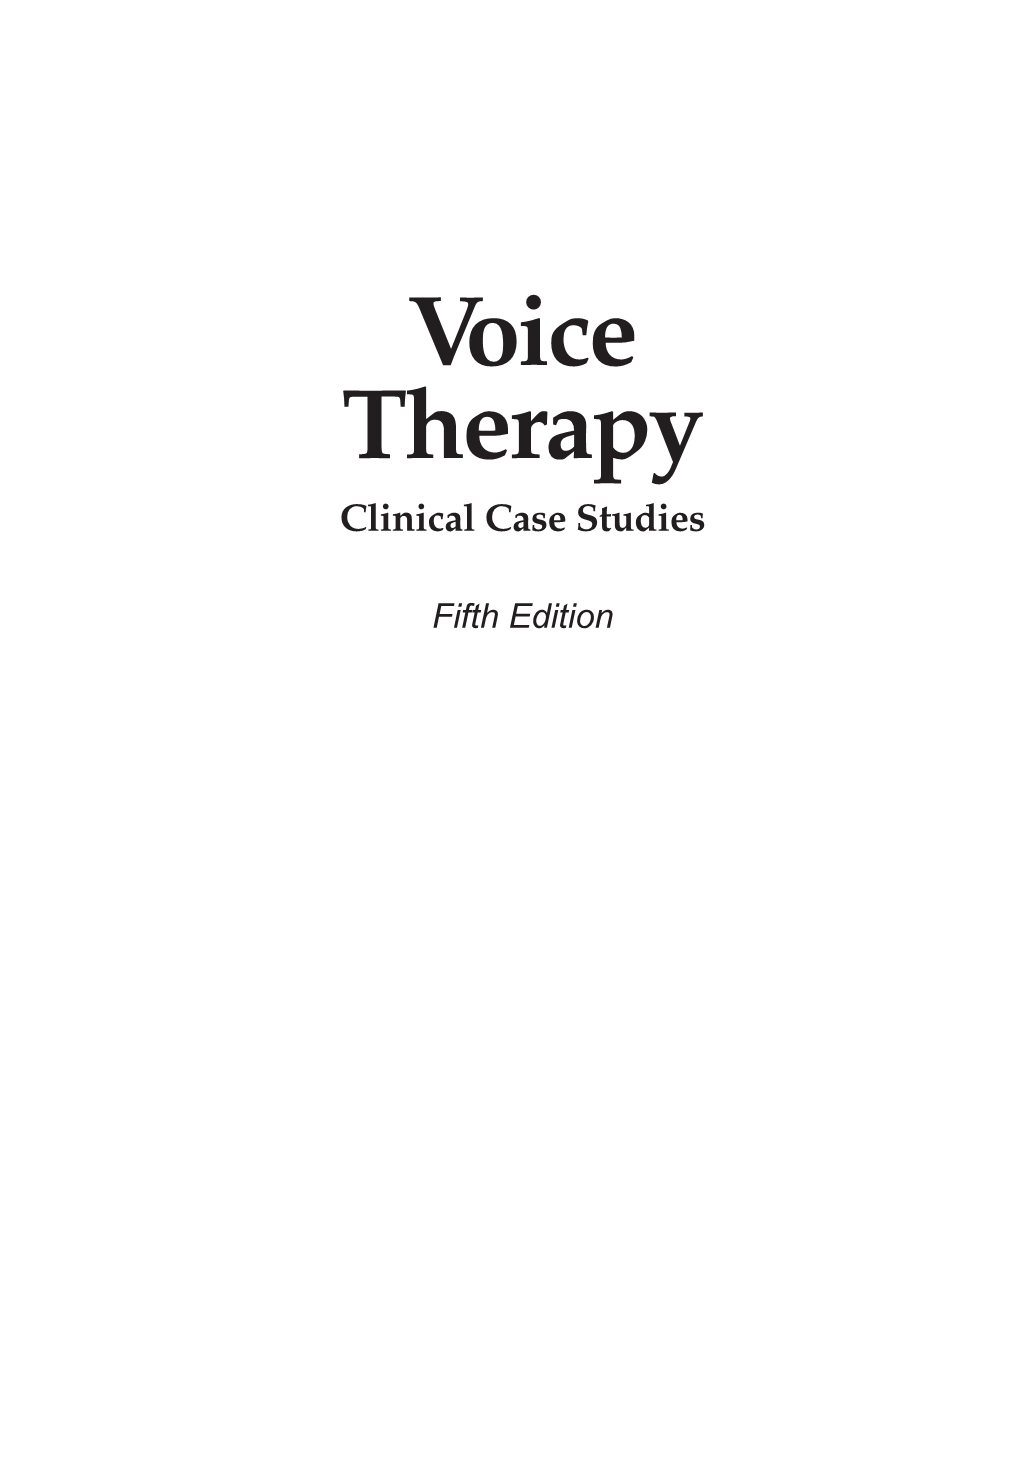 Voice Therapy Clinical Case Studies